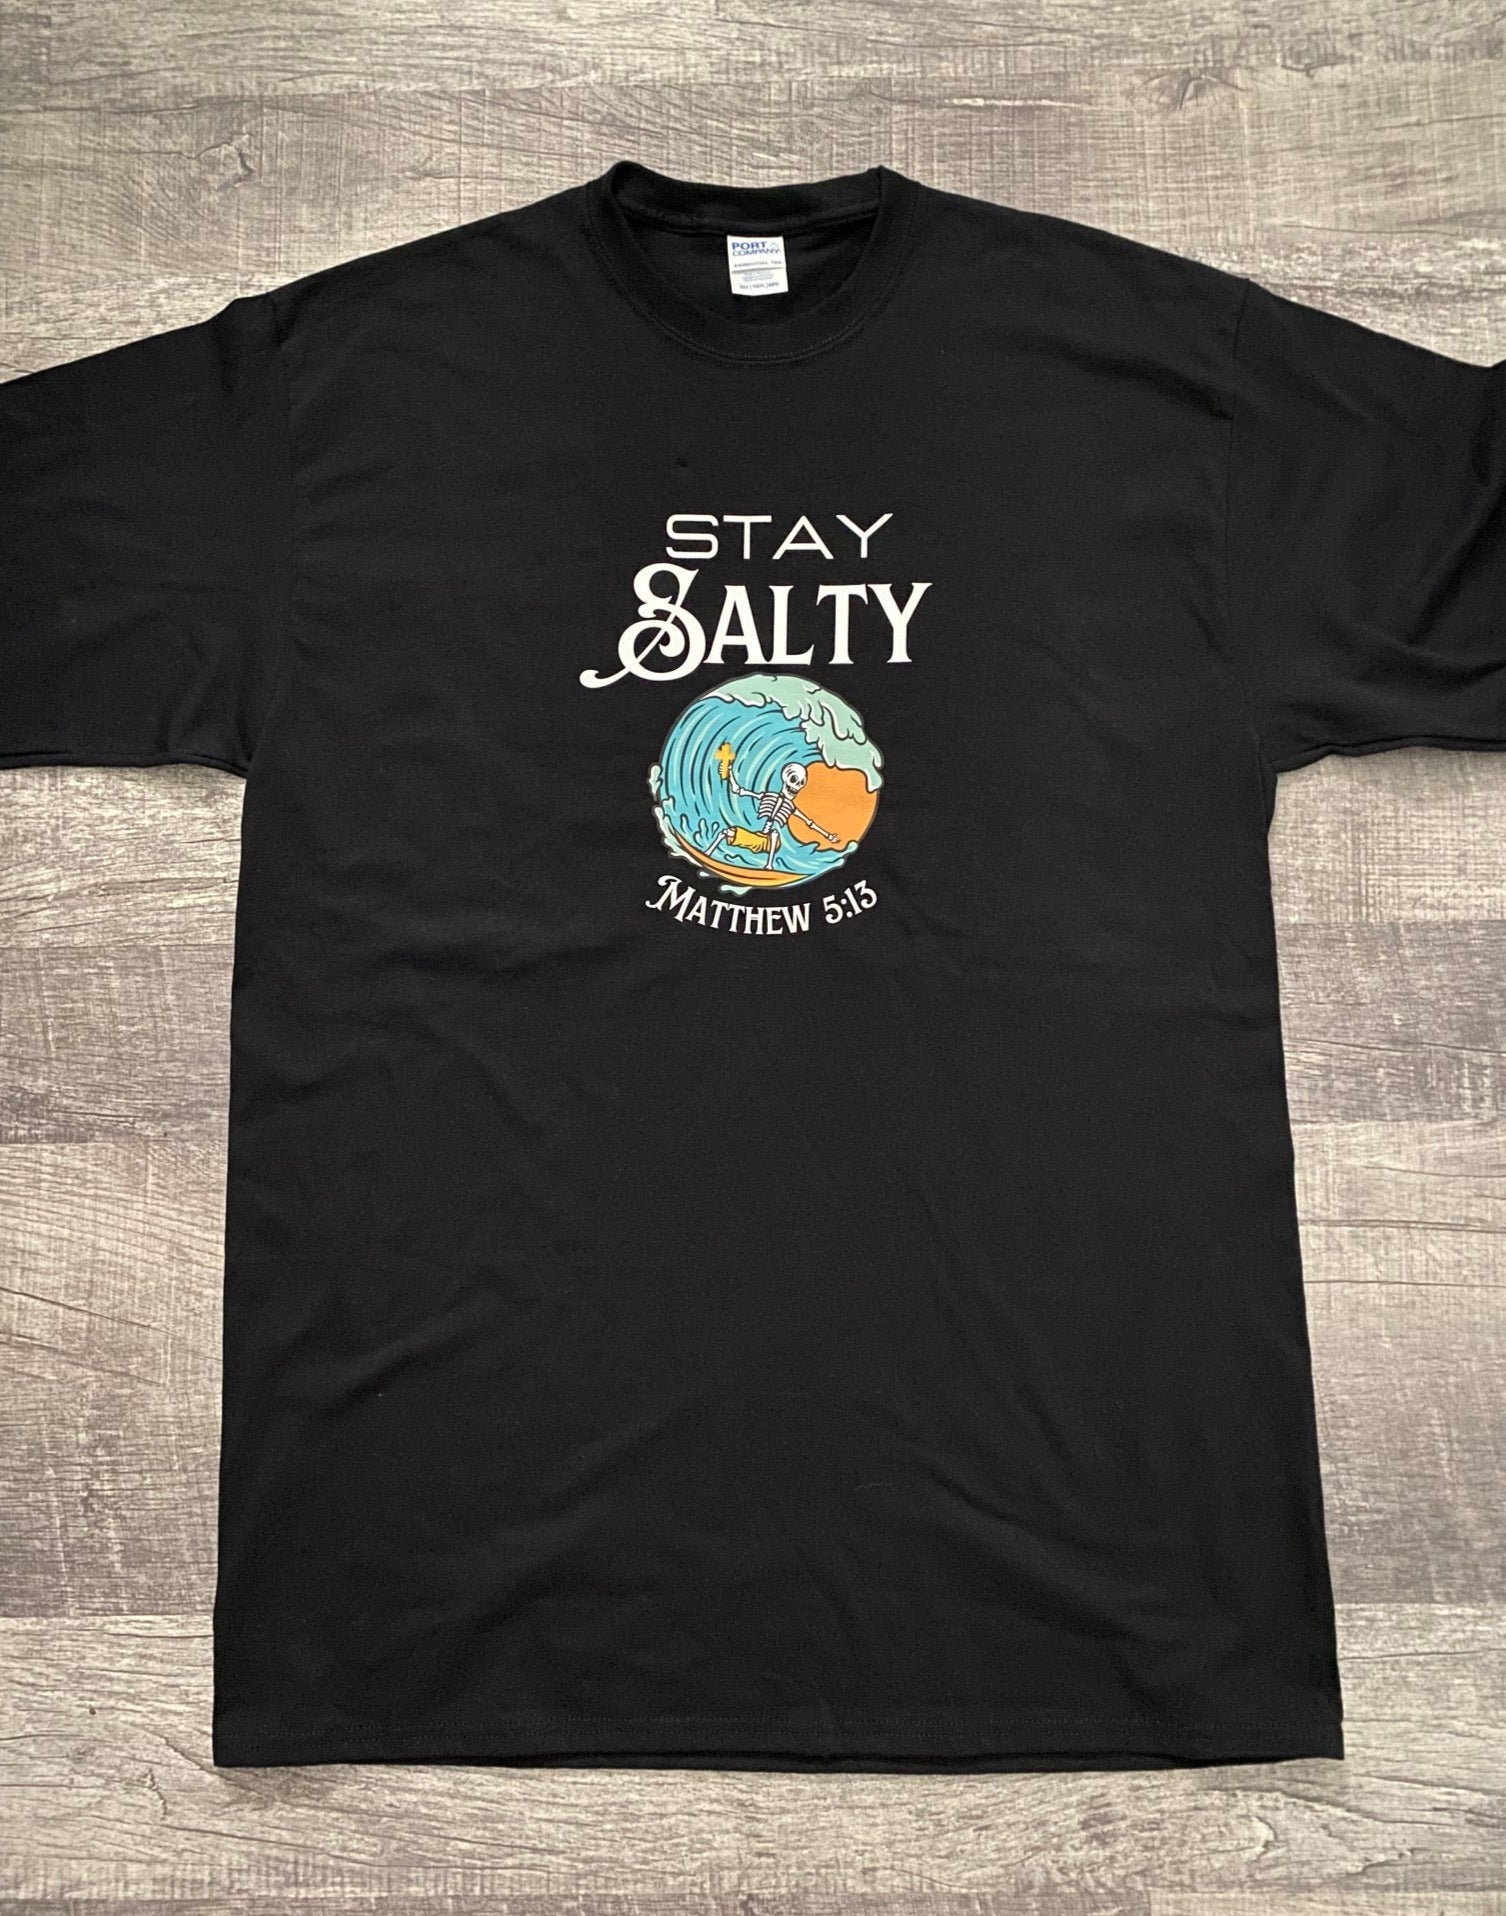 Black Tee with Stay Salty written in white above a skeleton riding a wave holding a cross. Below the wave is written Matthew 5:13. The wave is blue with orange behind it. The surfer is a skeleton wearing golden yellow shorts and riding an orange surfboard. The cross in the skeleton's hand is golden yellow. 